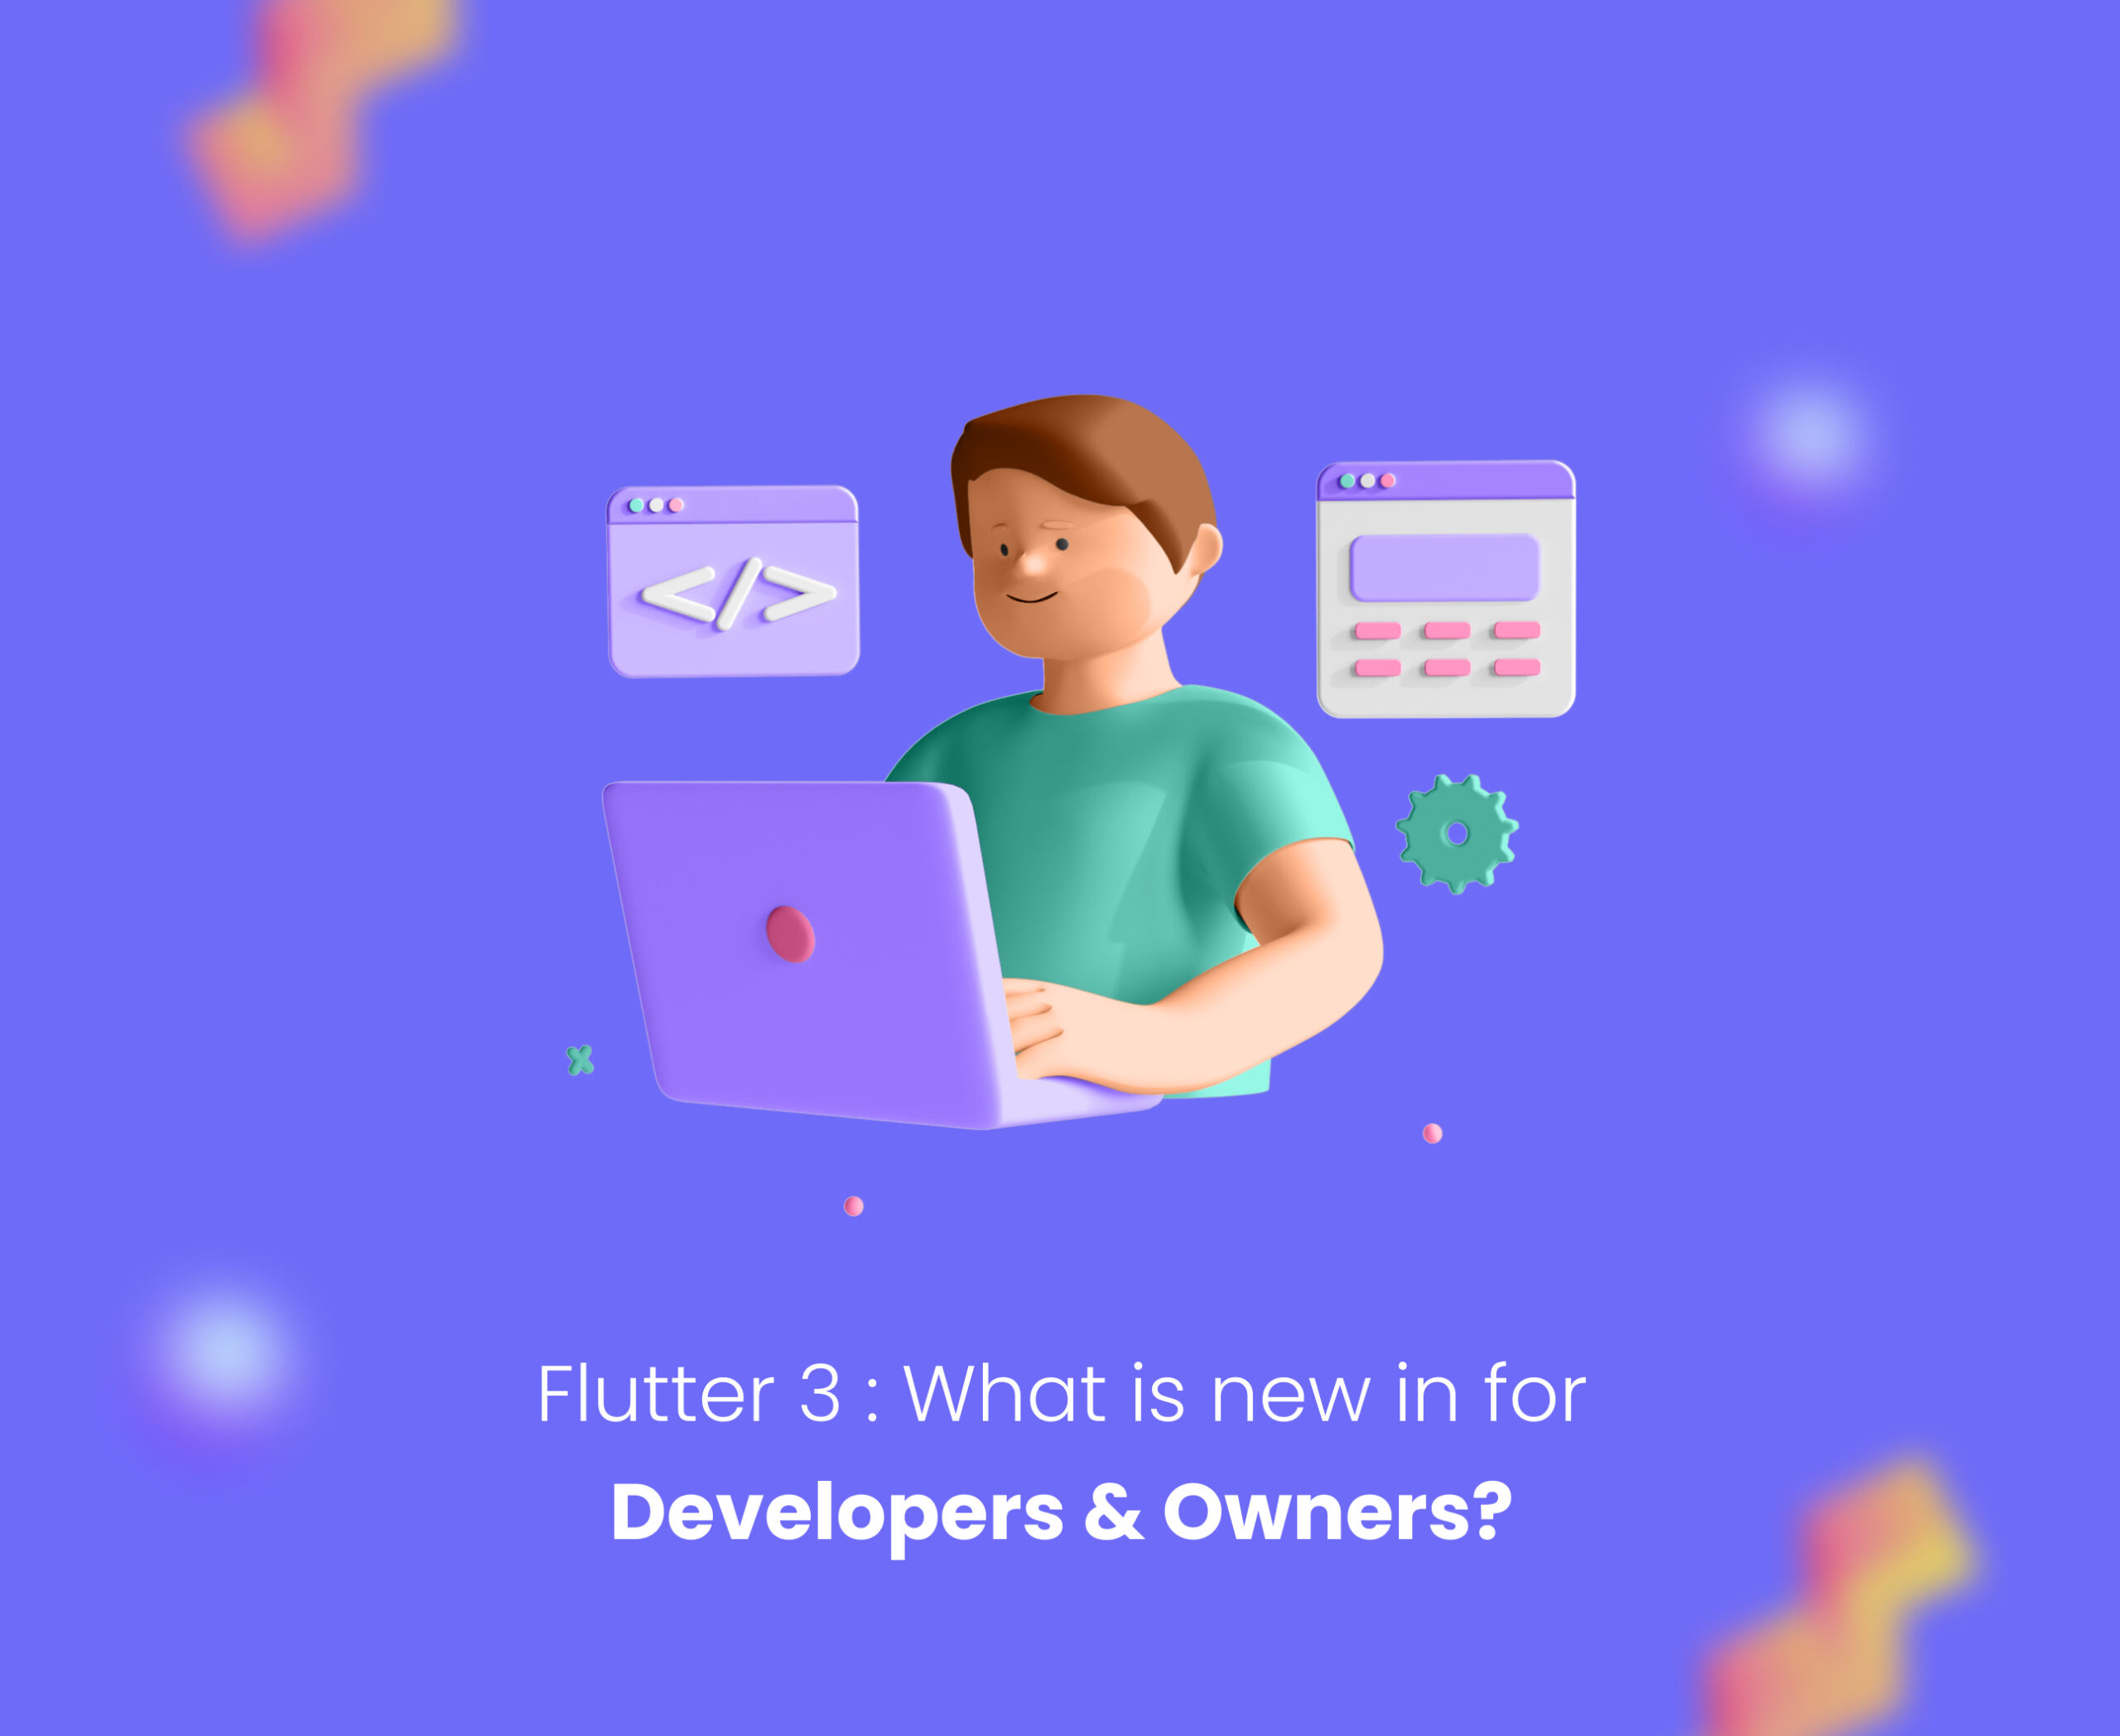 Flutter 3: What is new in for developers and Owners?